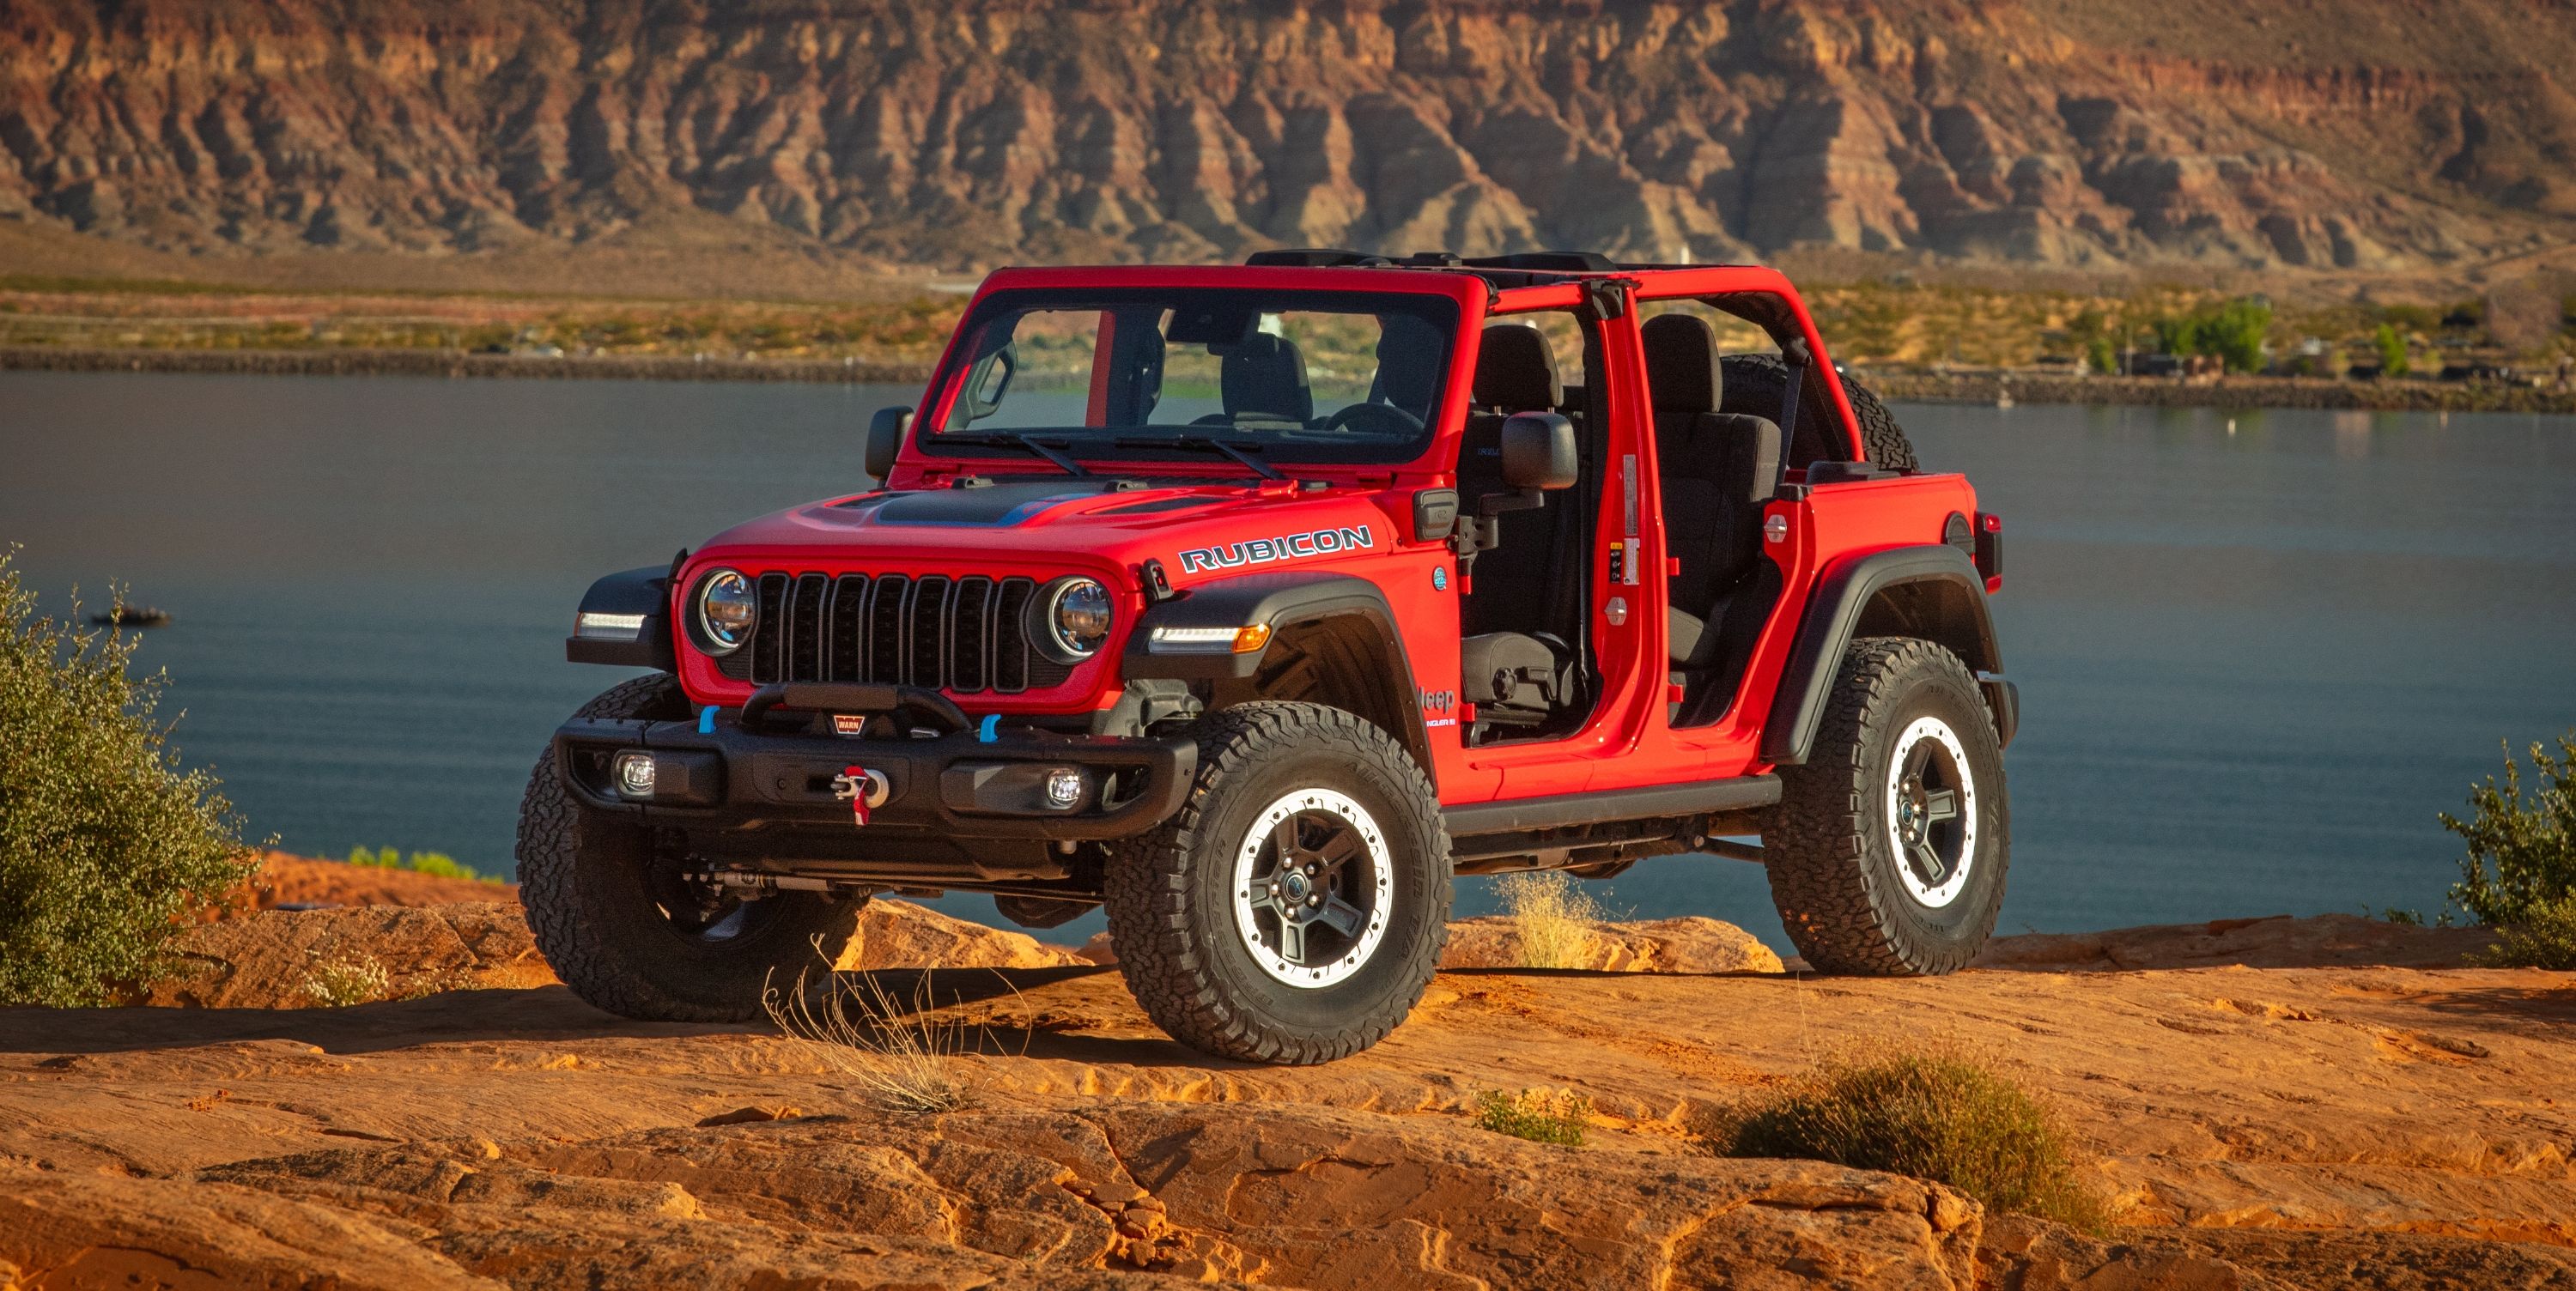 Jeep Now Offers a Two-Inch Lift Kit for Wrangler and Gladiator